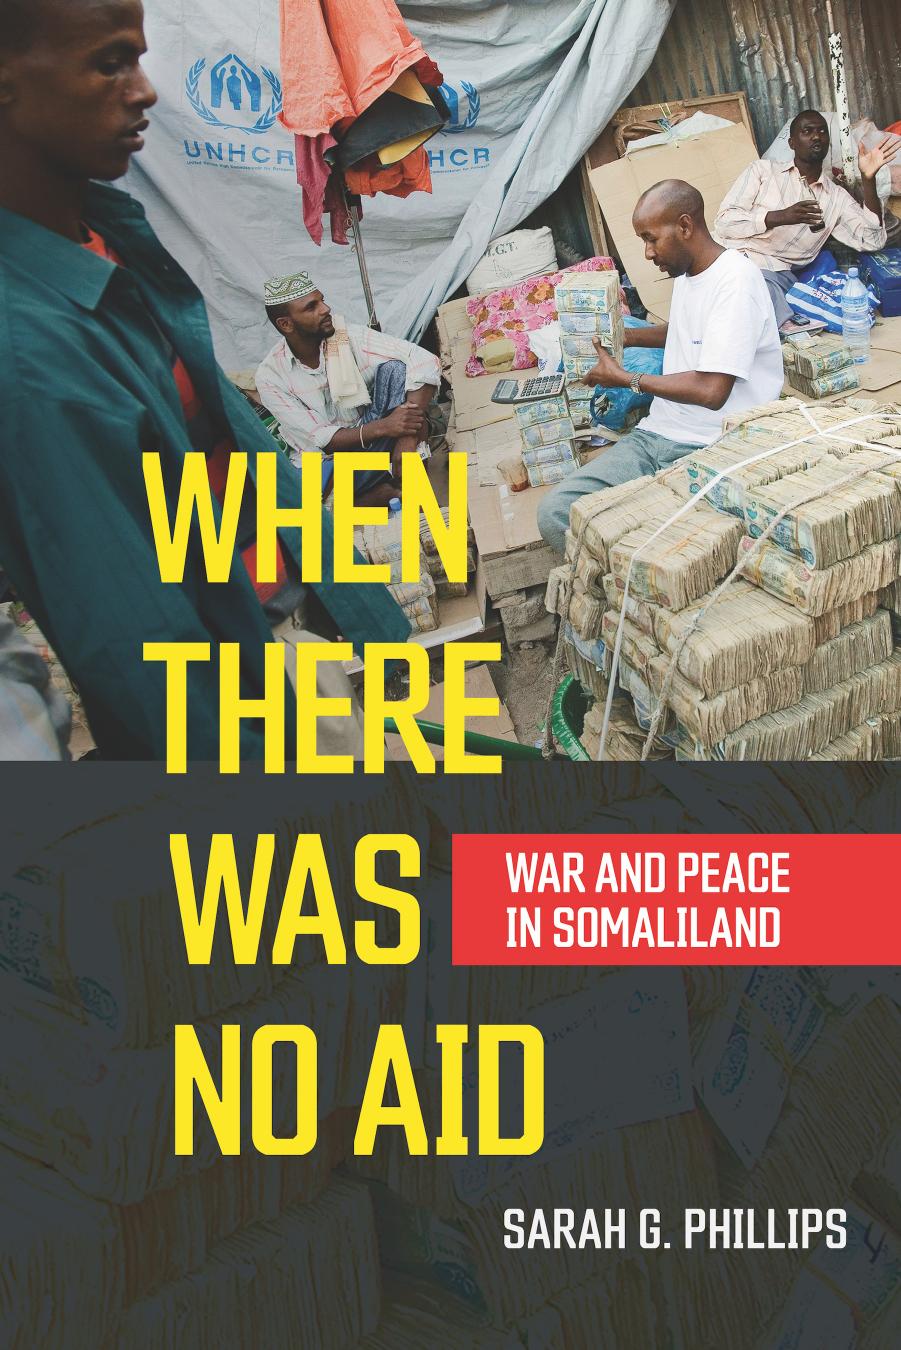 When There Was No Aid: War and Peace in Somaliland by Sarah G. Phillips